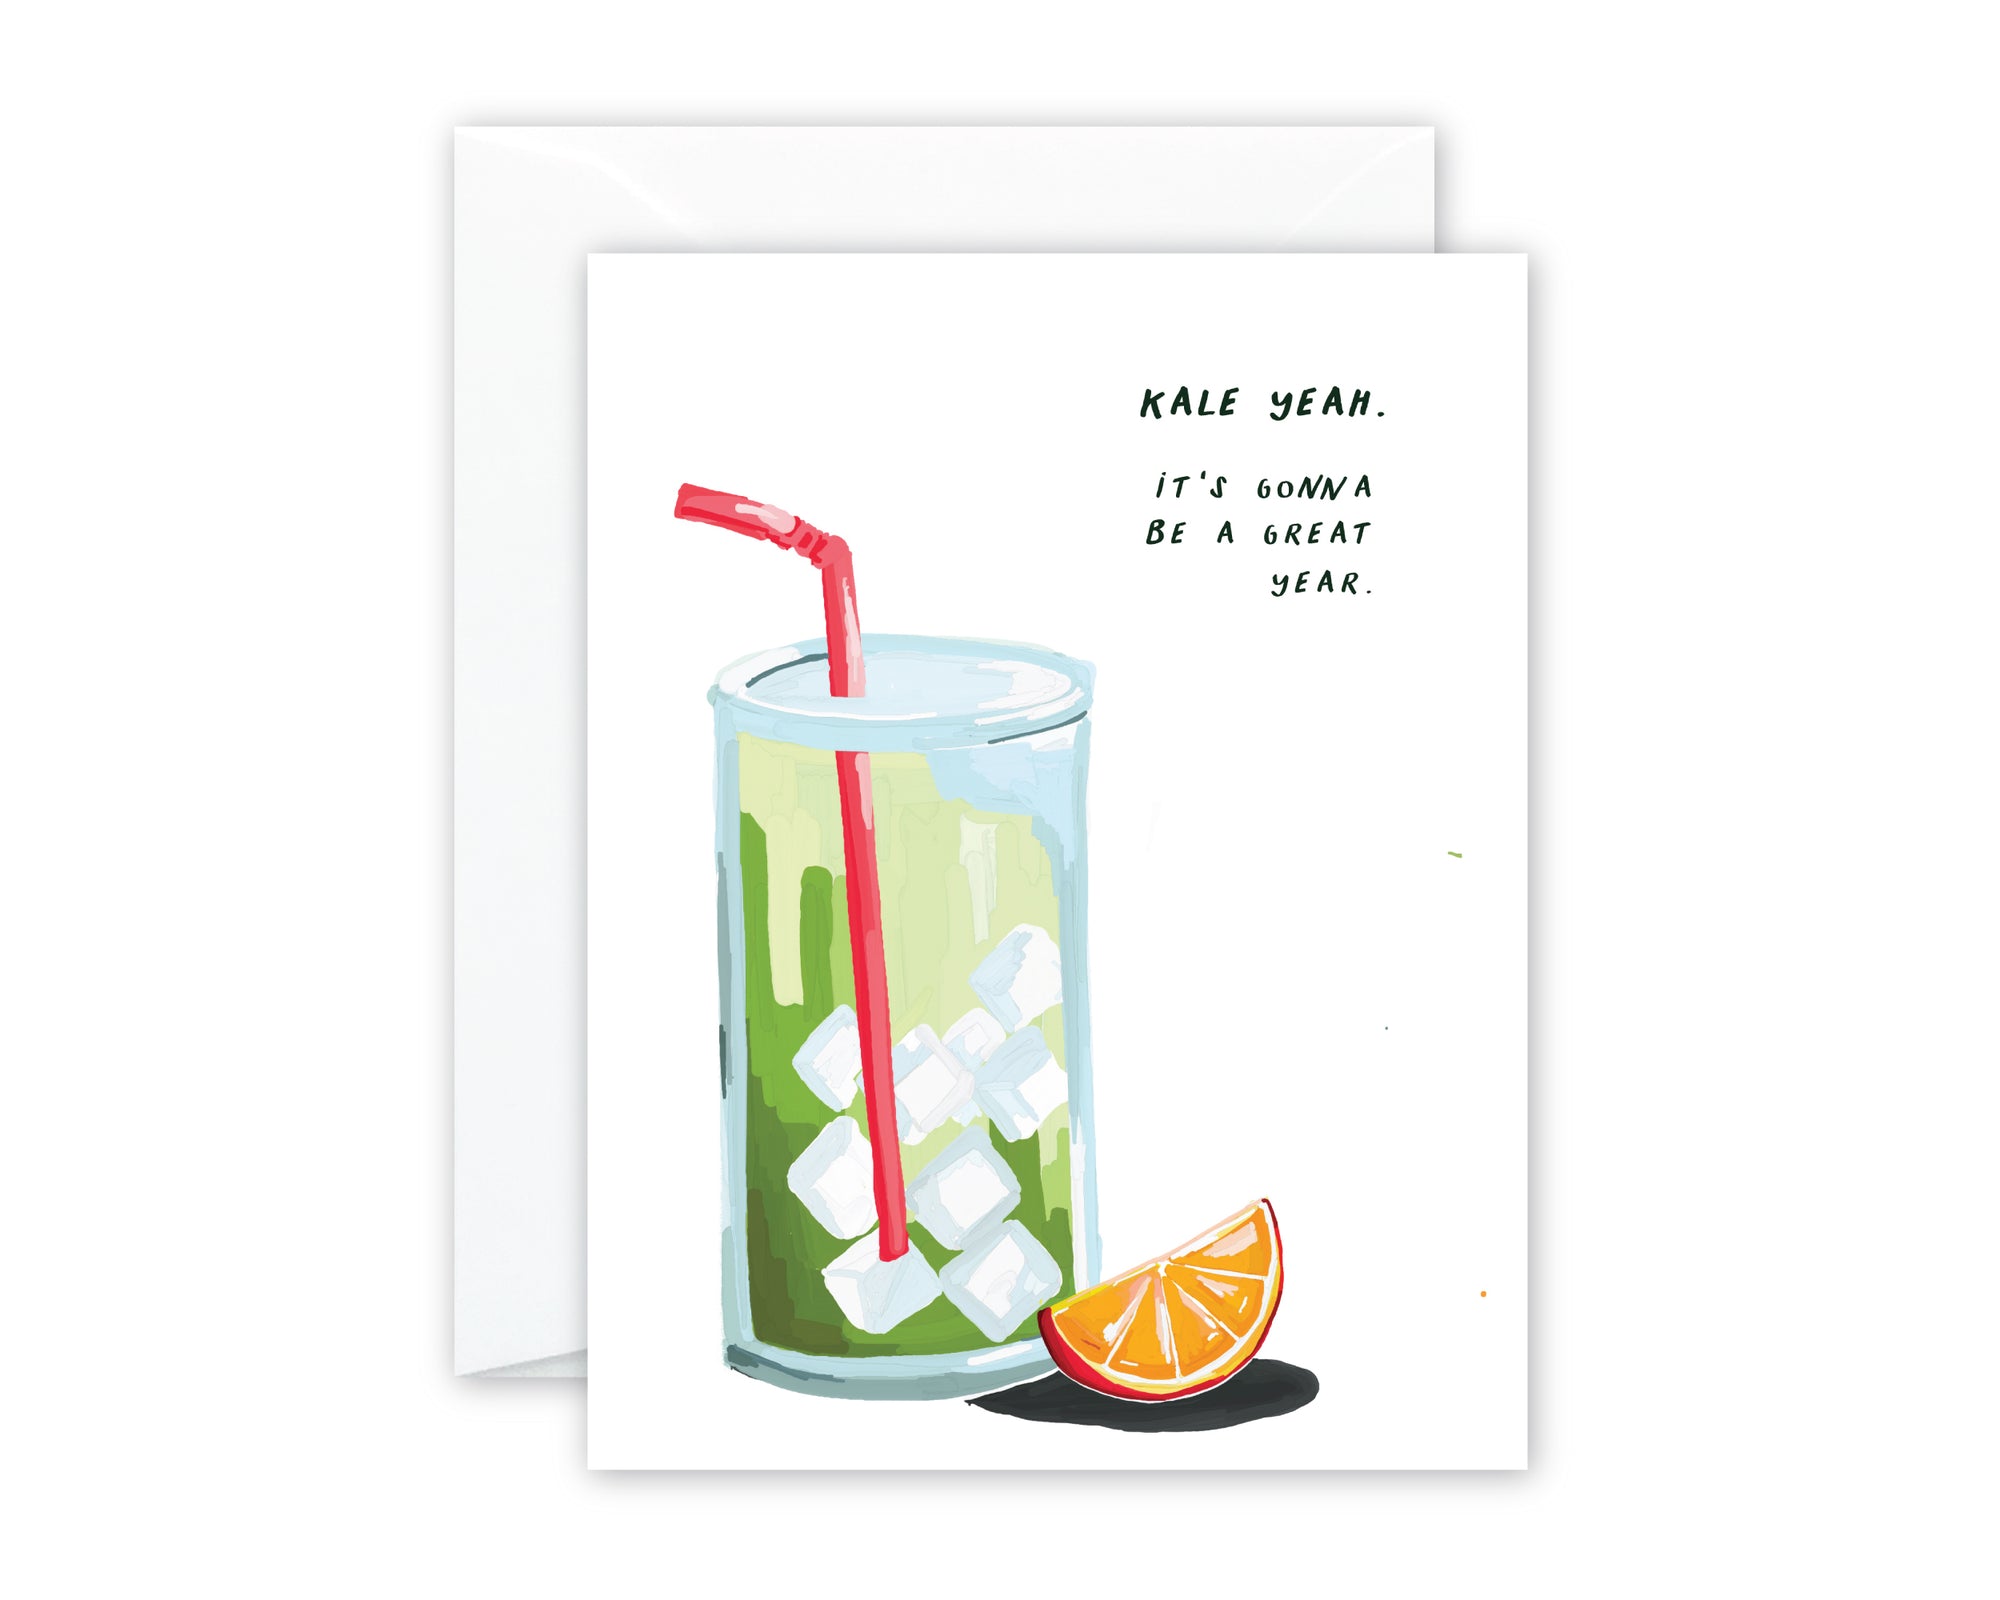 Greeting card with illustrated glass of kale juice, pink straw, orange slice. KALE YEAH. IT'S GONNA BE A GREAT YEAR.  White envelope.